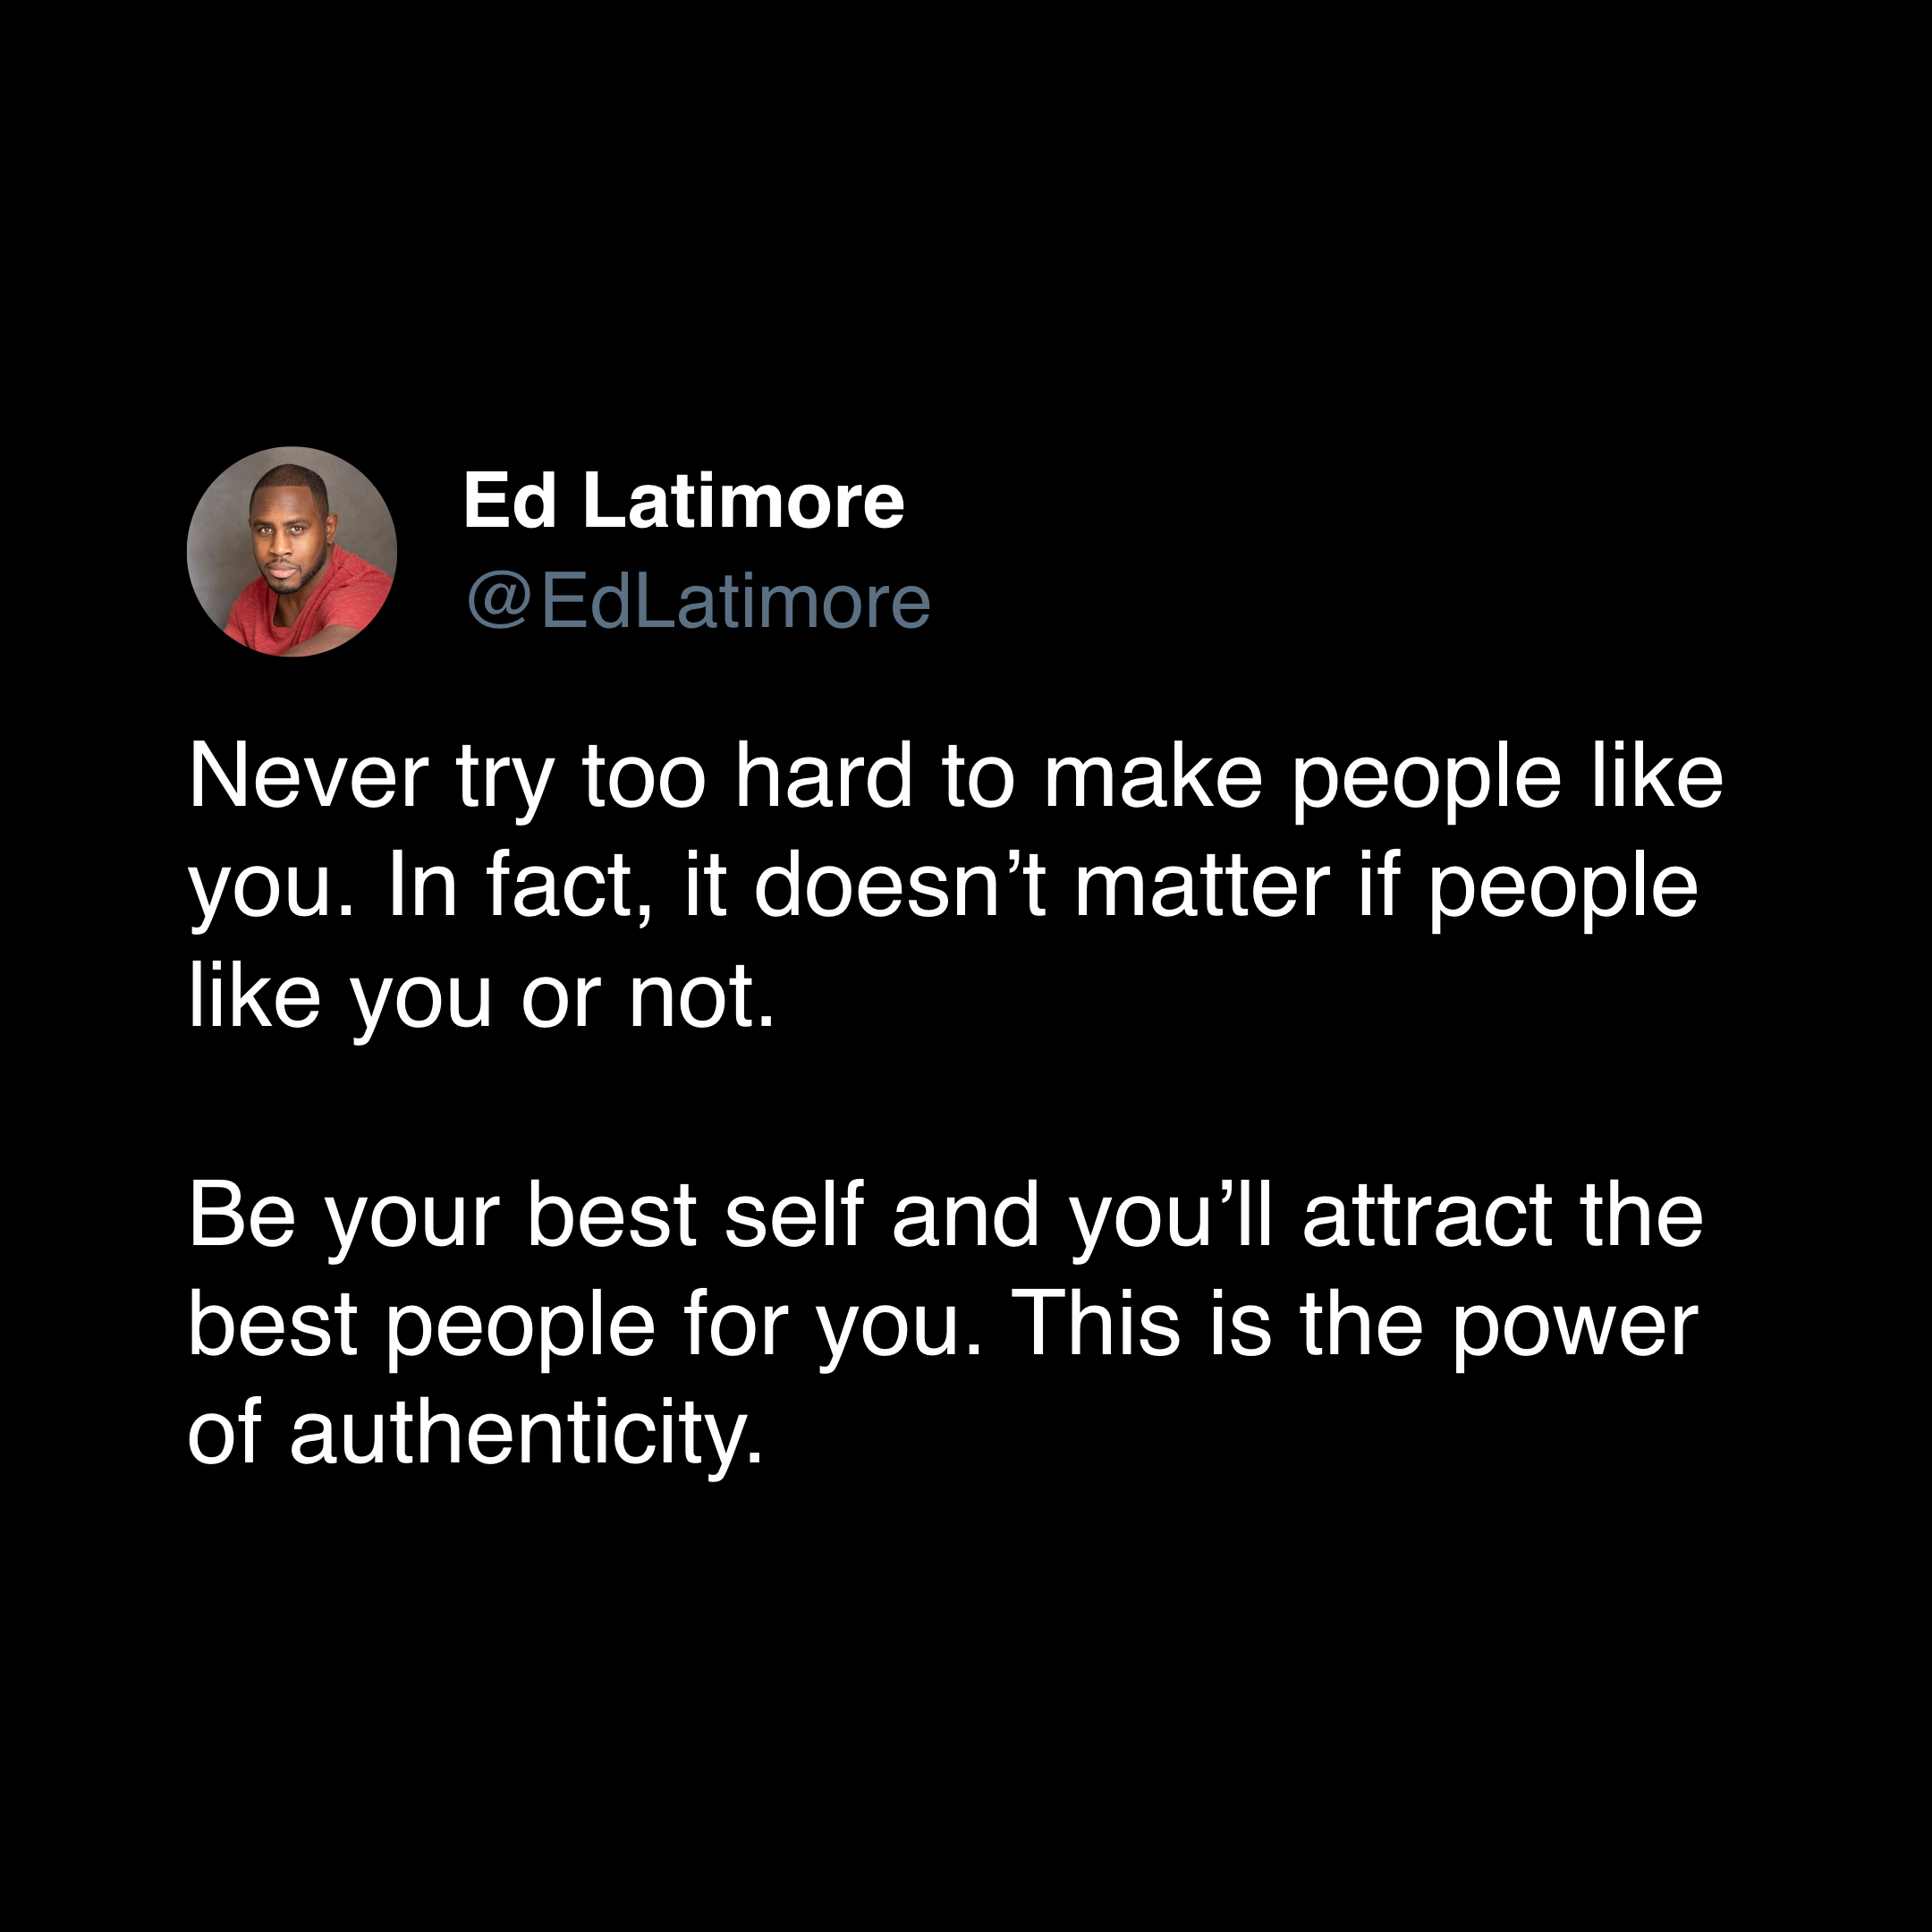 ed latimore authenticity quote "never try to hard to make people like you"